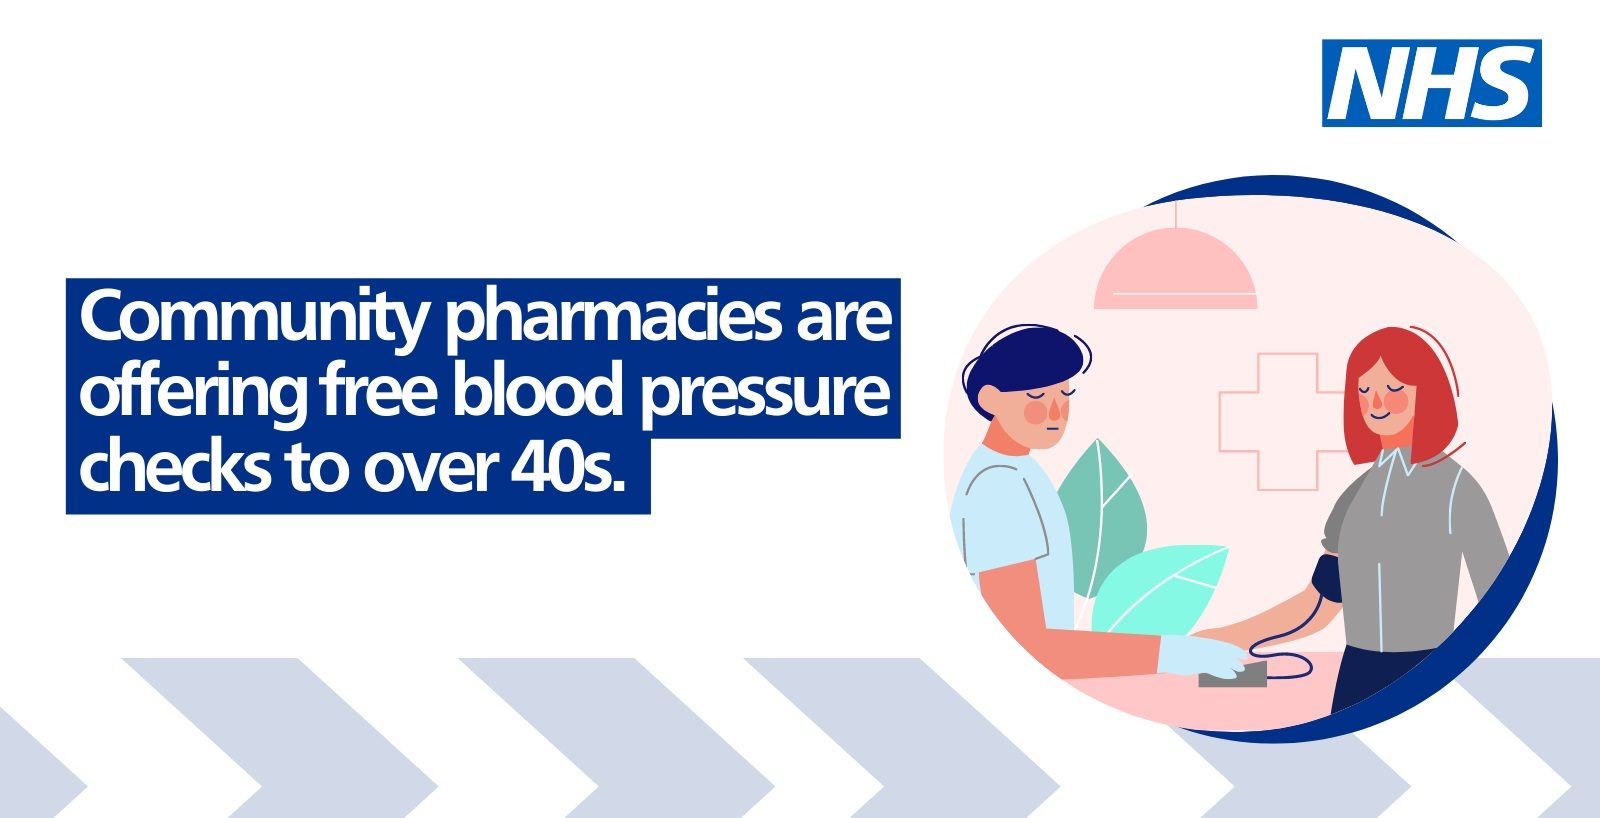 community pharmacies are offering free blood pressure checks for over 40s - illustration of nurse in blue top testing blood pressure of smiling red haired woman